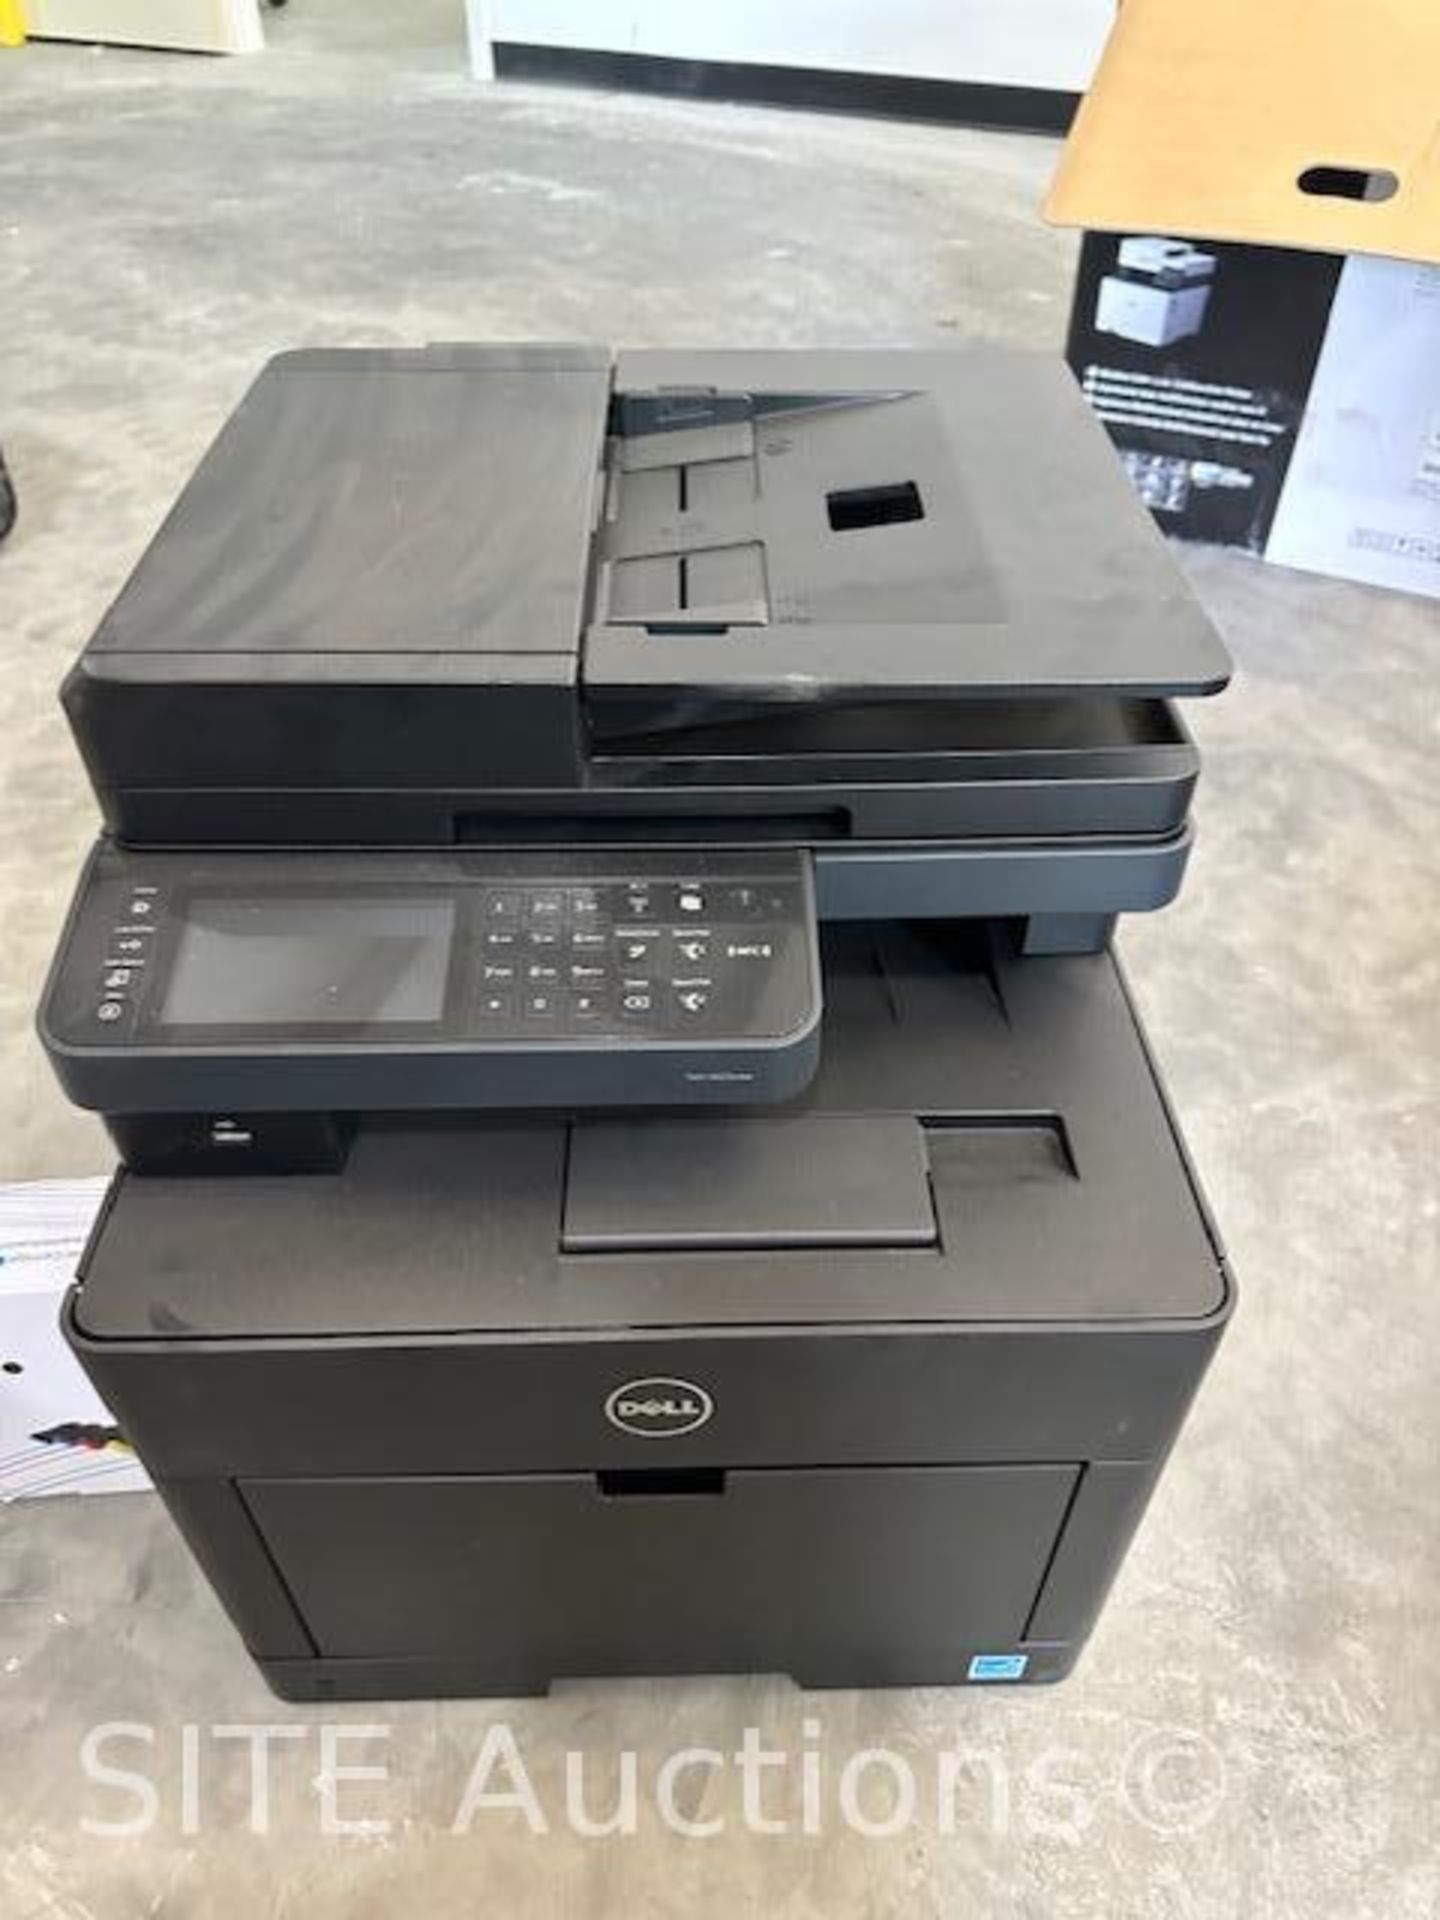 Dell Color Smart H625cdw Multifunction Printer - Image 2 of 6